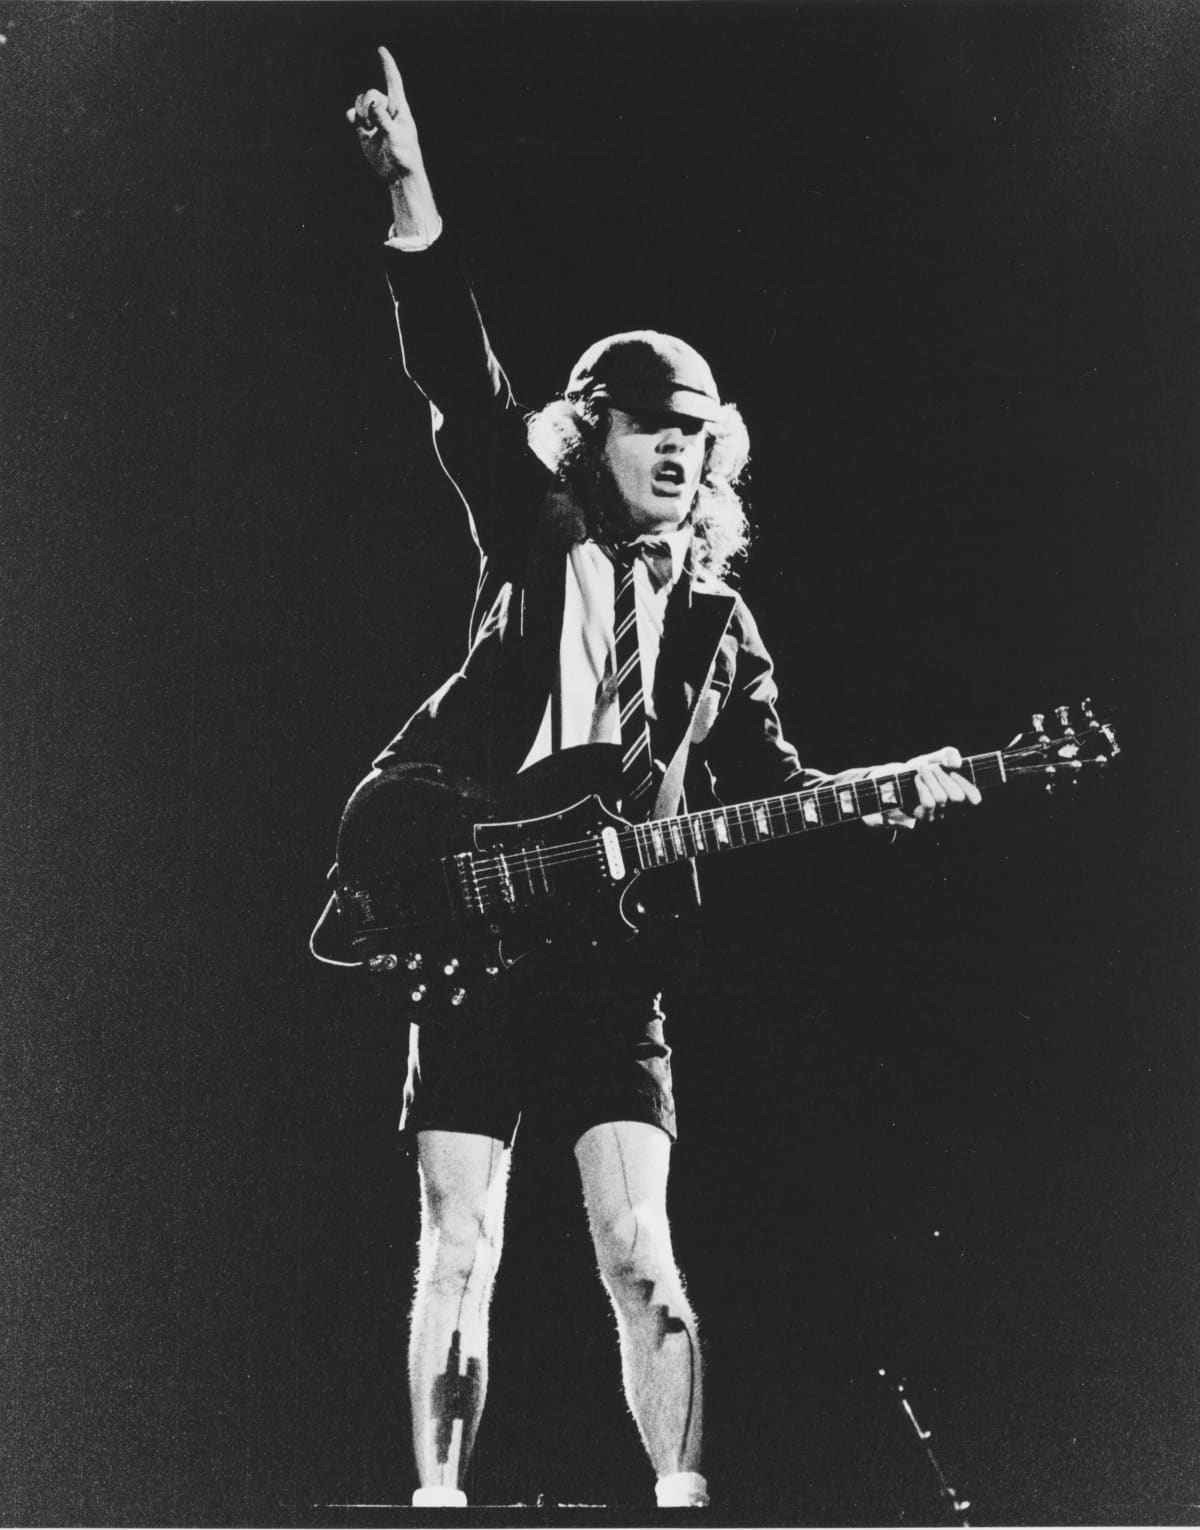 Angus Young of AC/DC performing on stage, Lyceum Theatre, London, United Kingdom on July 7, 1976 from the Lock Up Your Daughters Tour. (Photo by Dick Barnatt/Redferns)